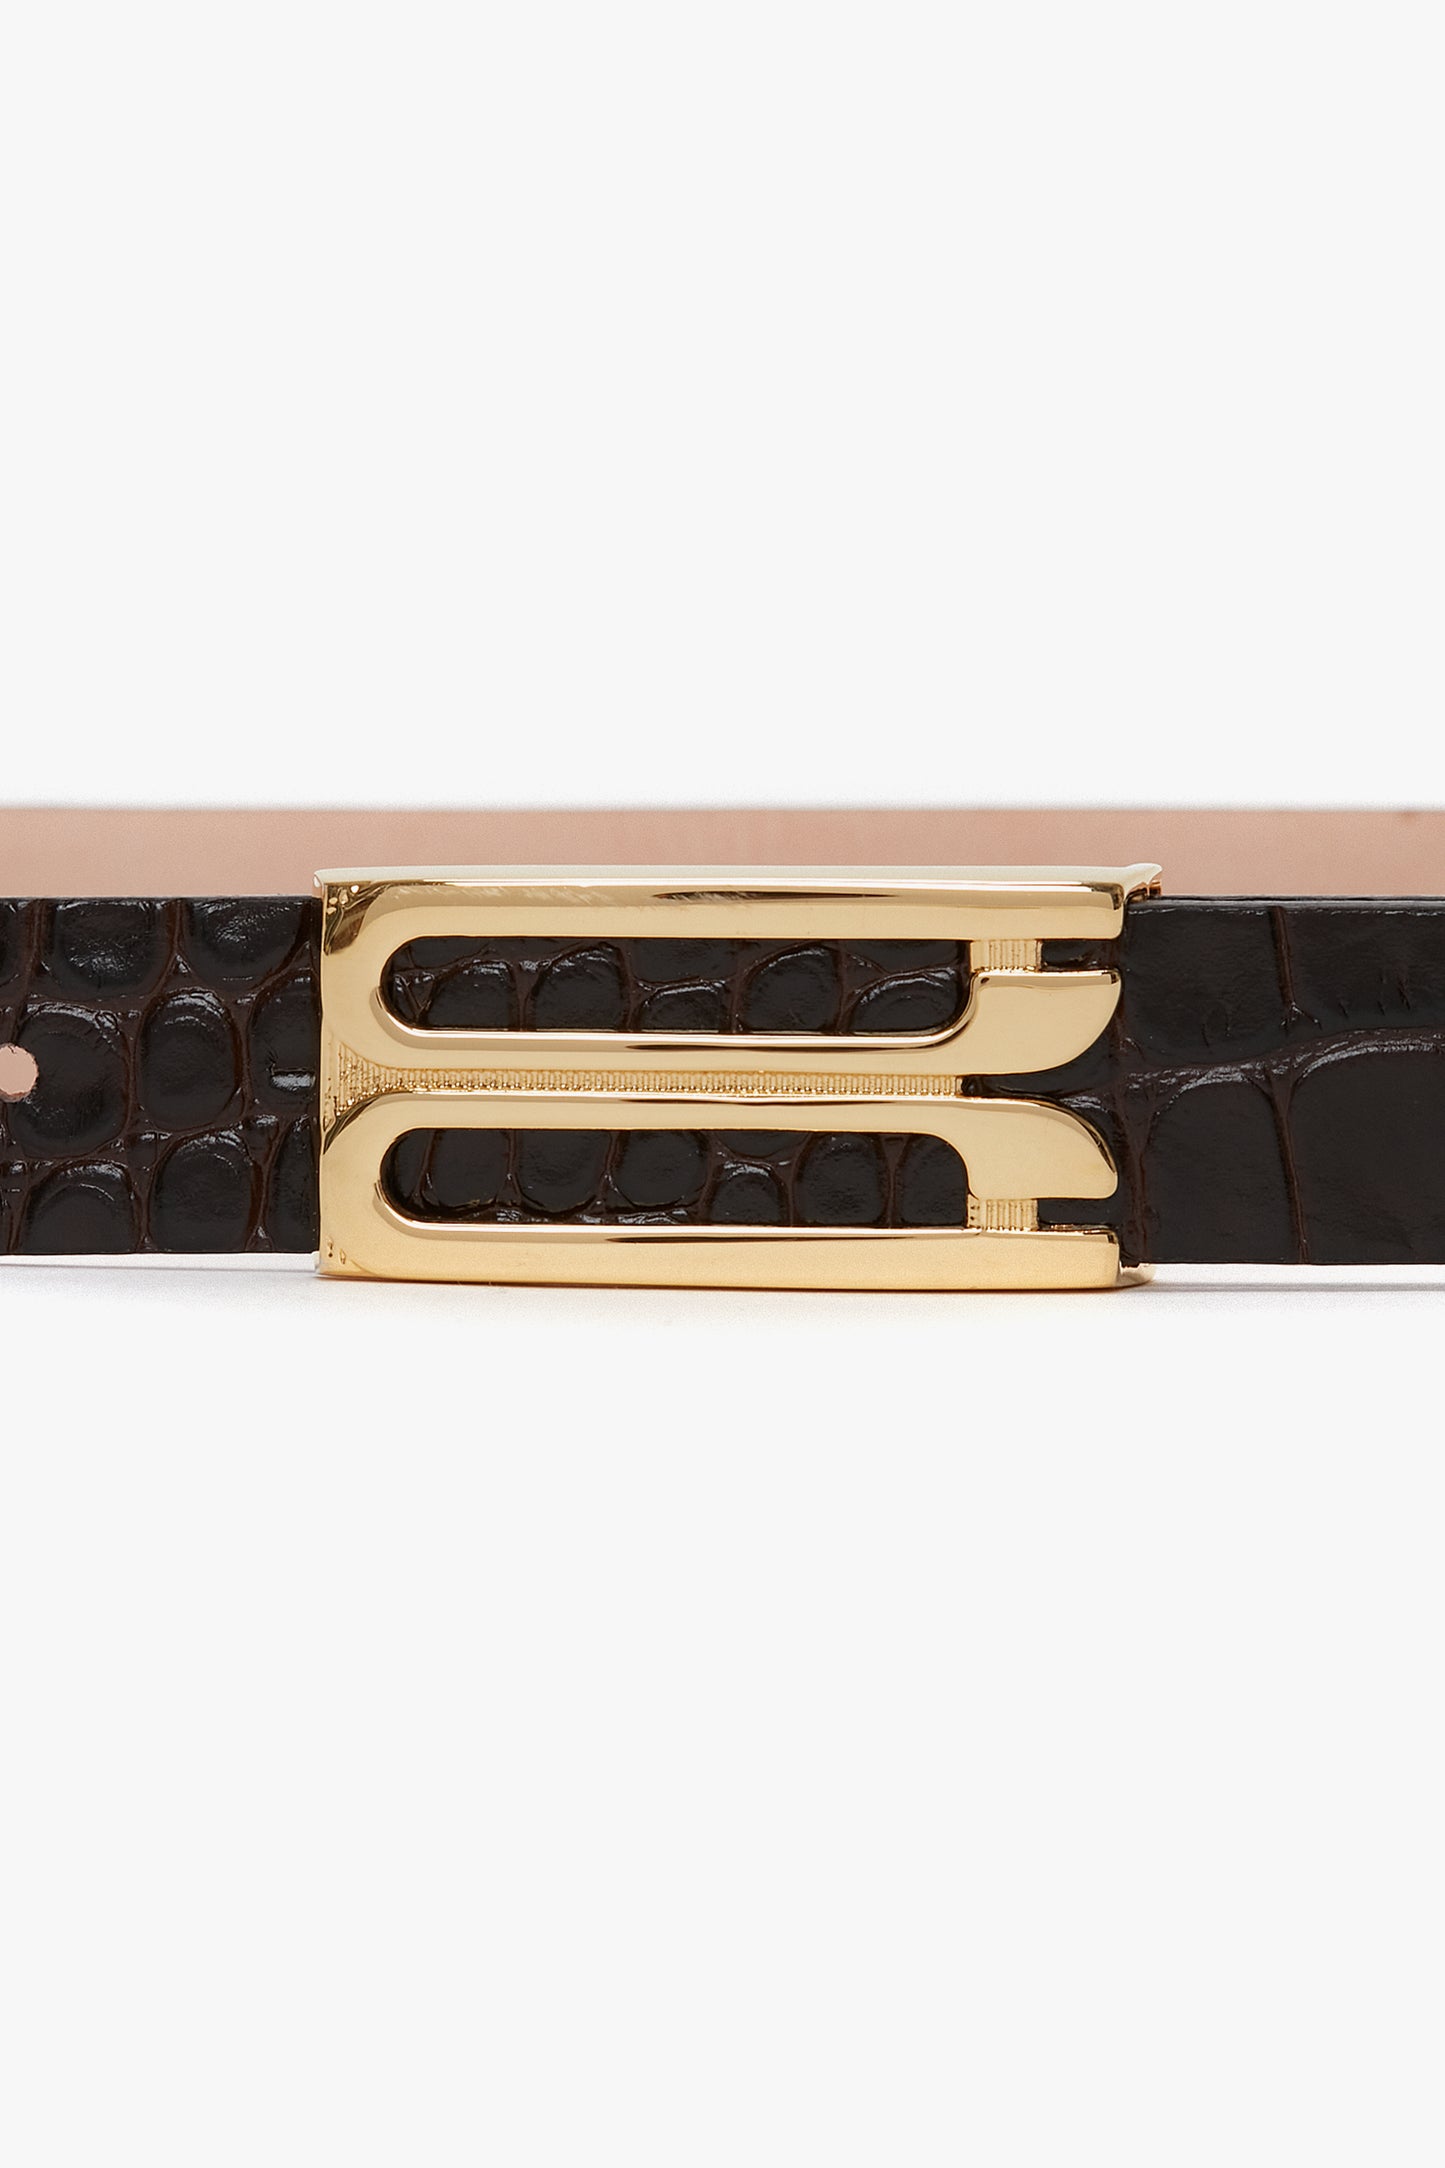 A close-up image of a Frame Belt In Espresso Croc Embossed Calf Leather made from black croc-embossed calf leather, featuring a gold-toned buckle with unique dual-prong design by Victoria Beckham.